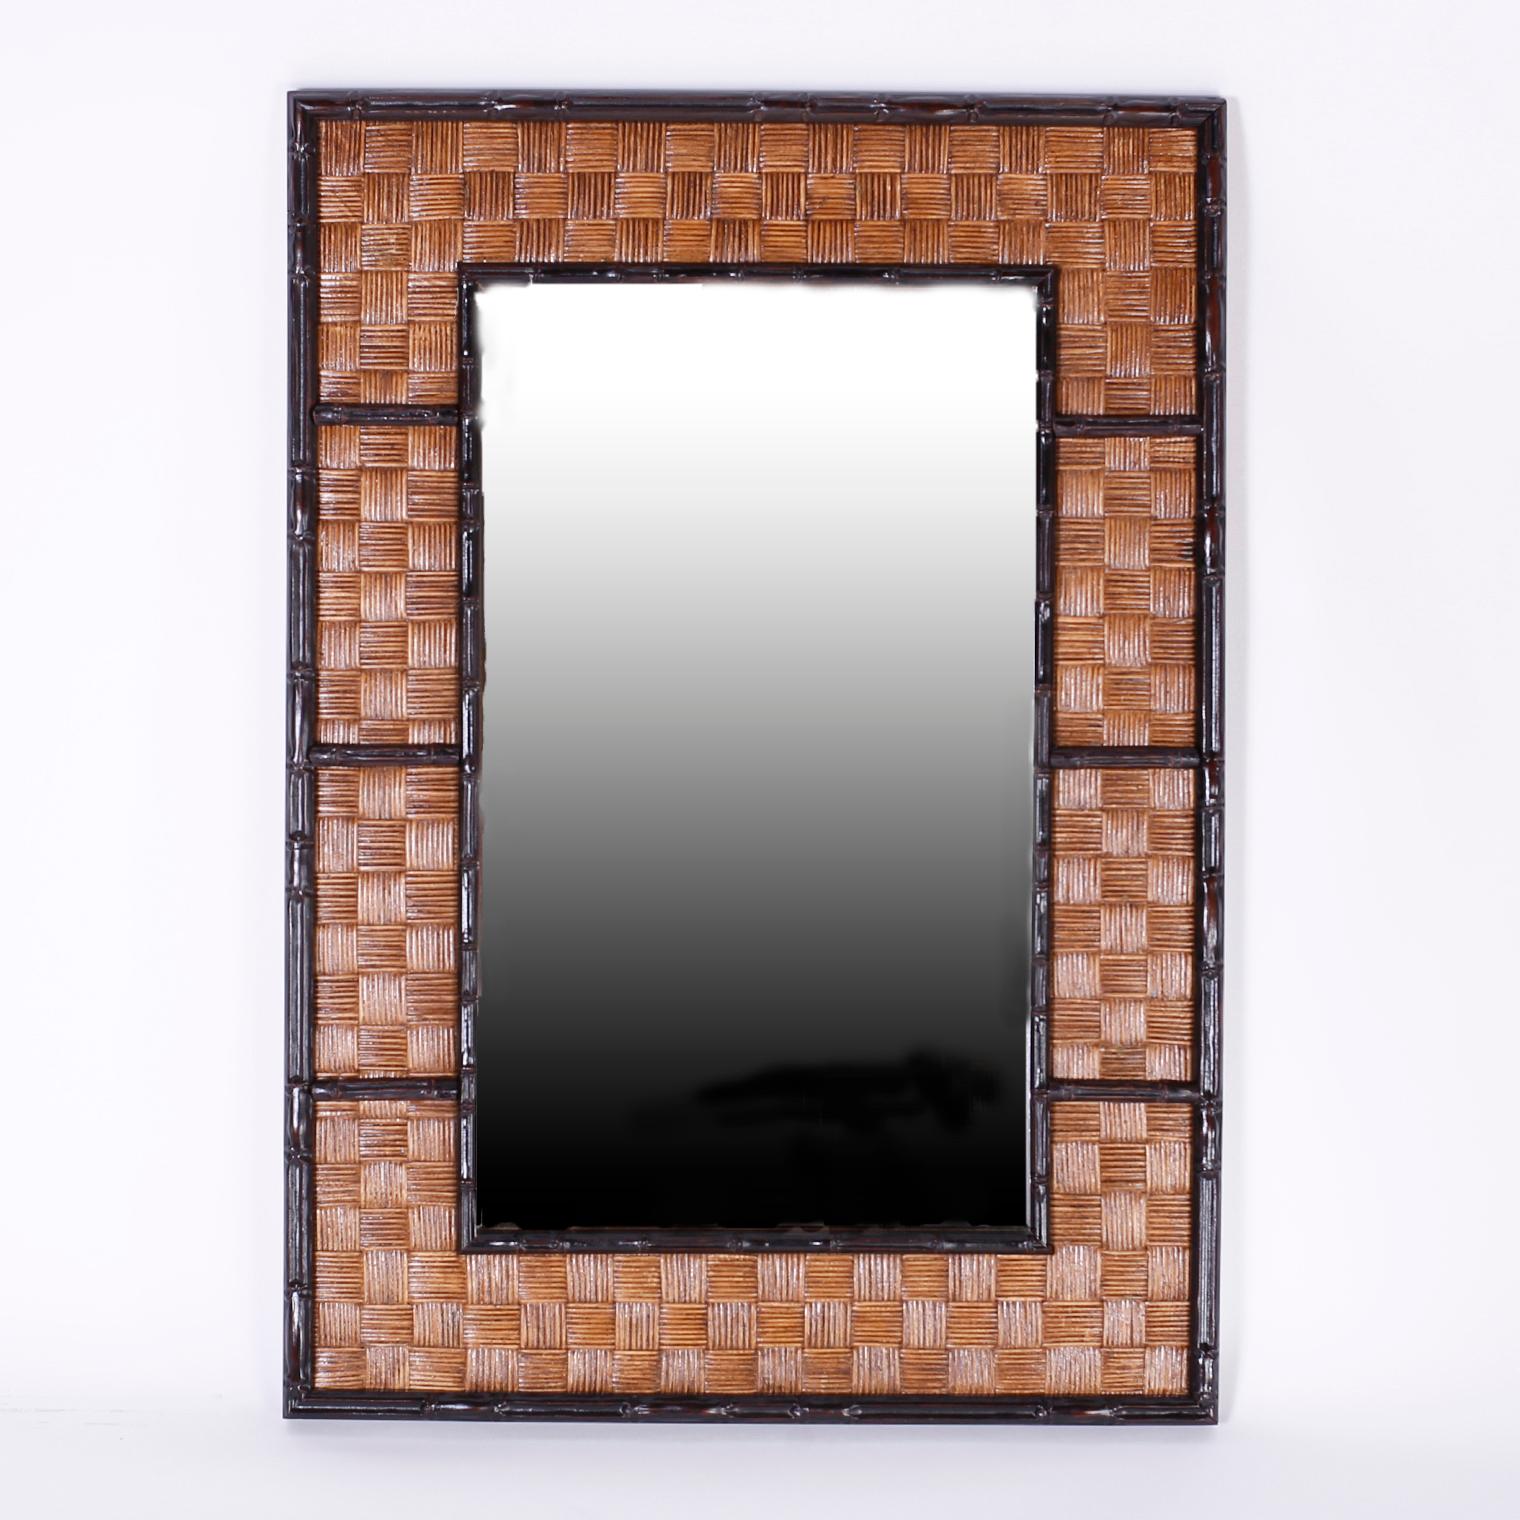 Pair of midcentury rectangular mirrors with ebonized carved wood faux bamboo borders around patch work braided reed, giving this pair a warm, earthy yet hip and modern vibe.